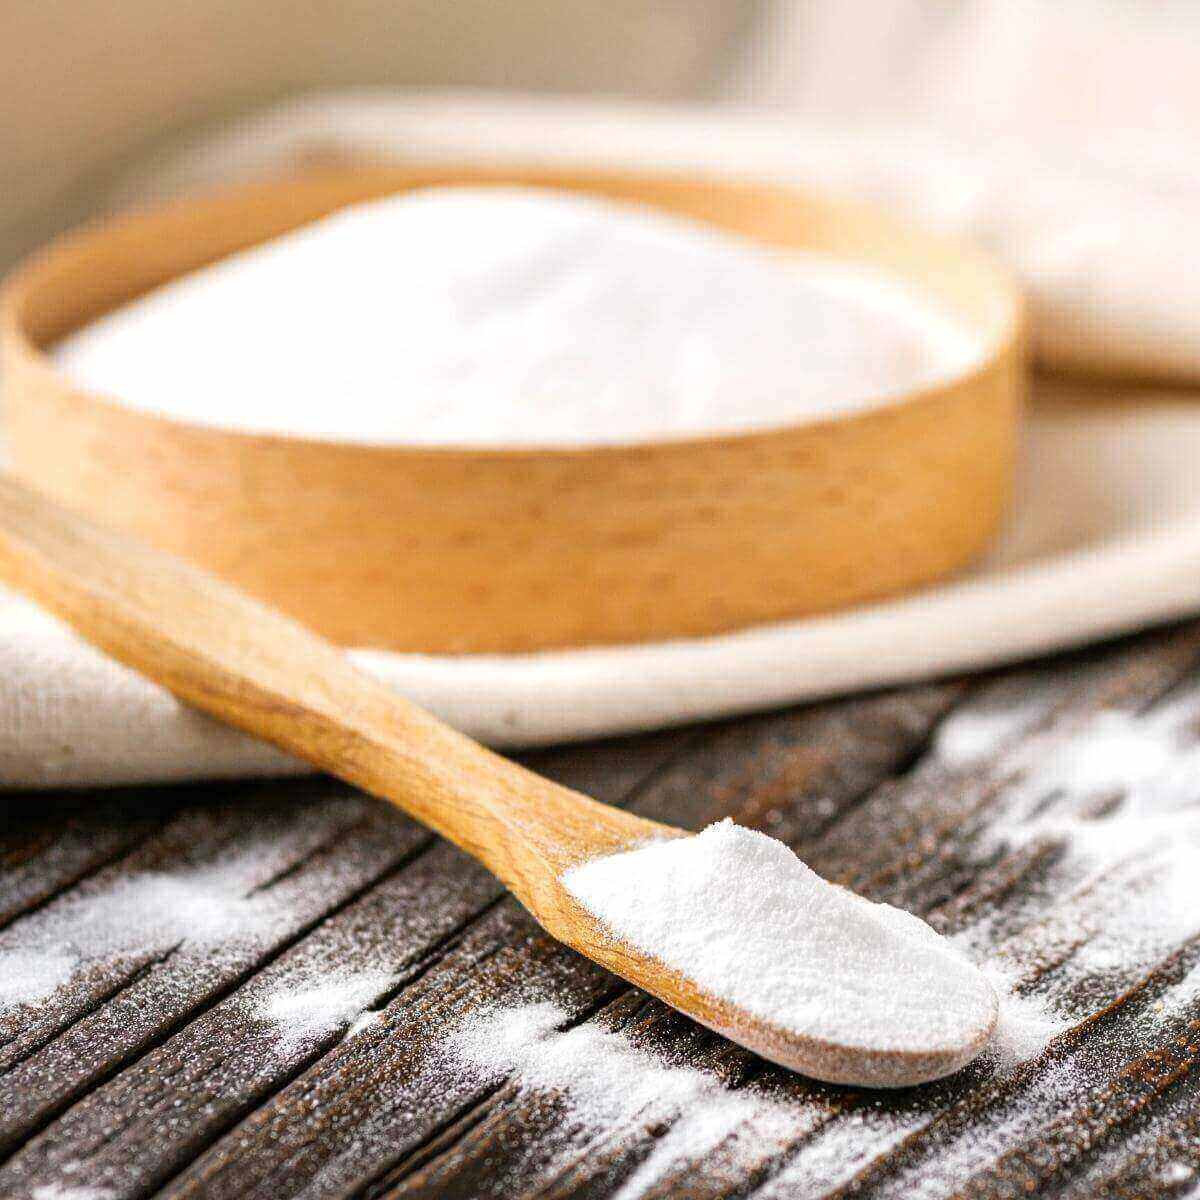 What is baking soda used for